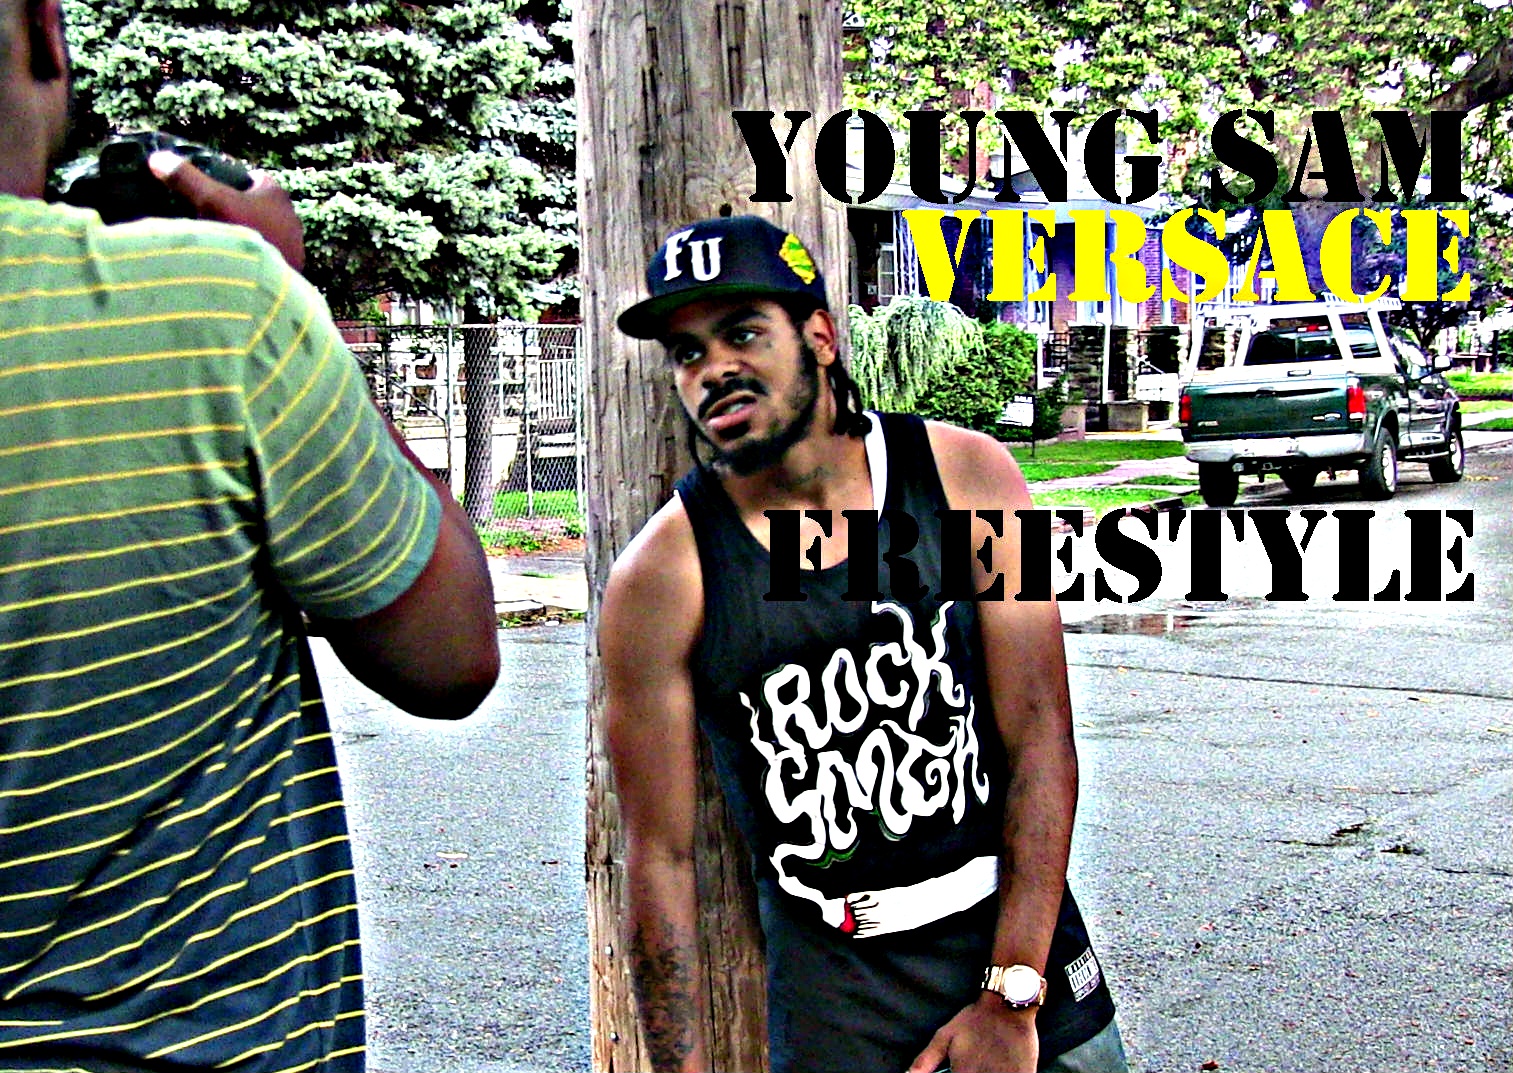 young-sam-versace-freestyle-HHS1987-2013 Young Sam - Versace Freestyle  